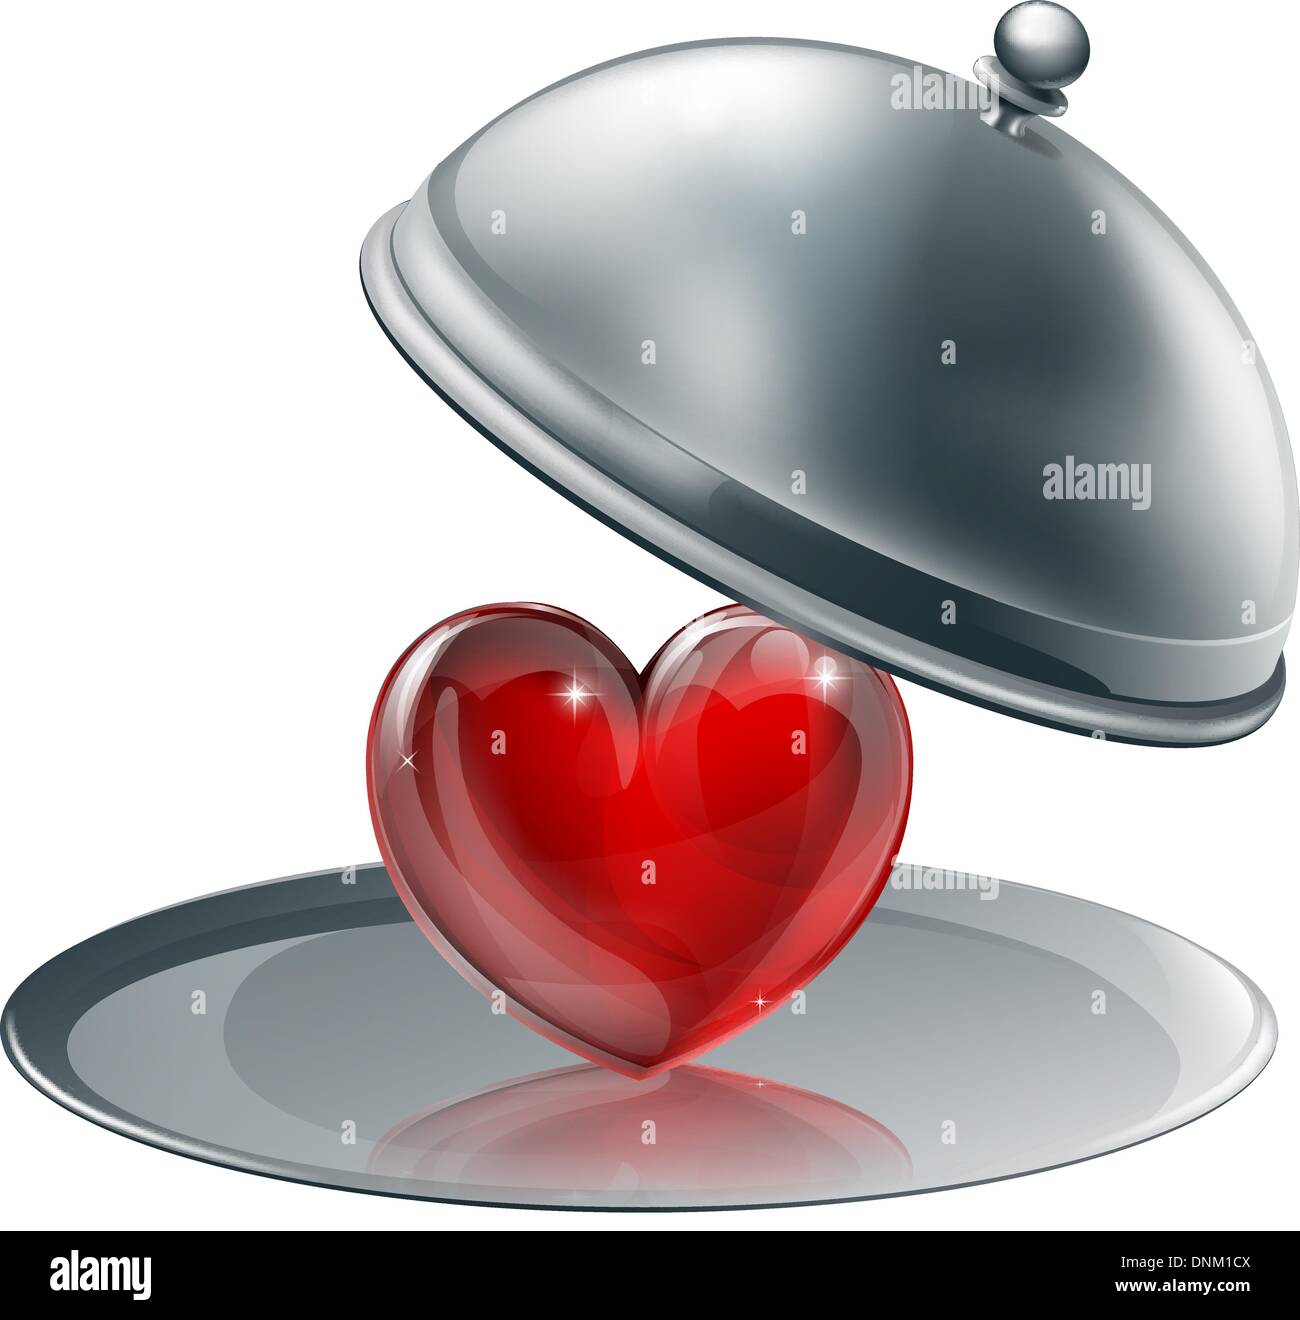 Illustration of a heart on a silver platter . Concept for giving love or of love of cooking perhaps Stock Vector